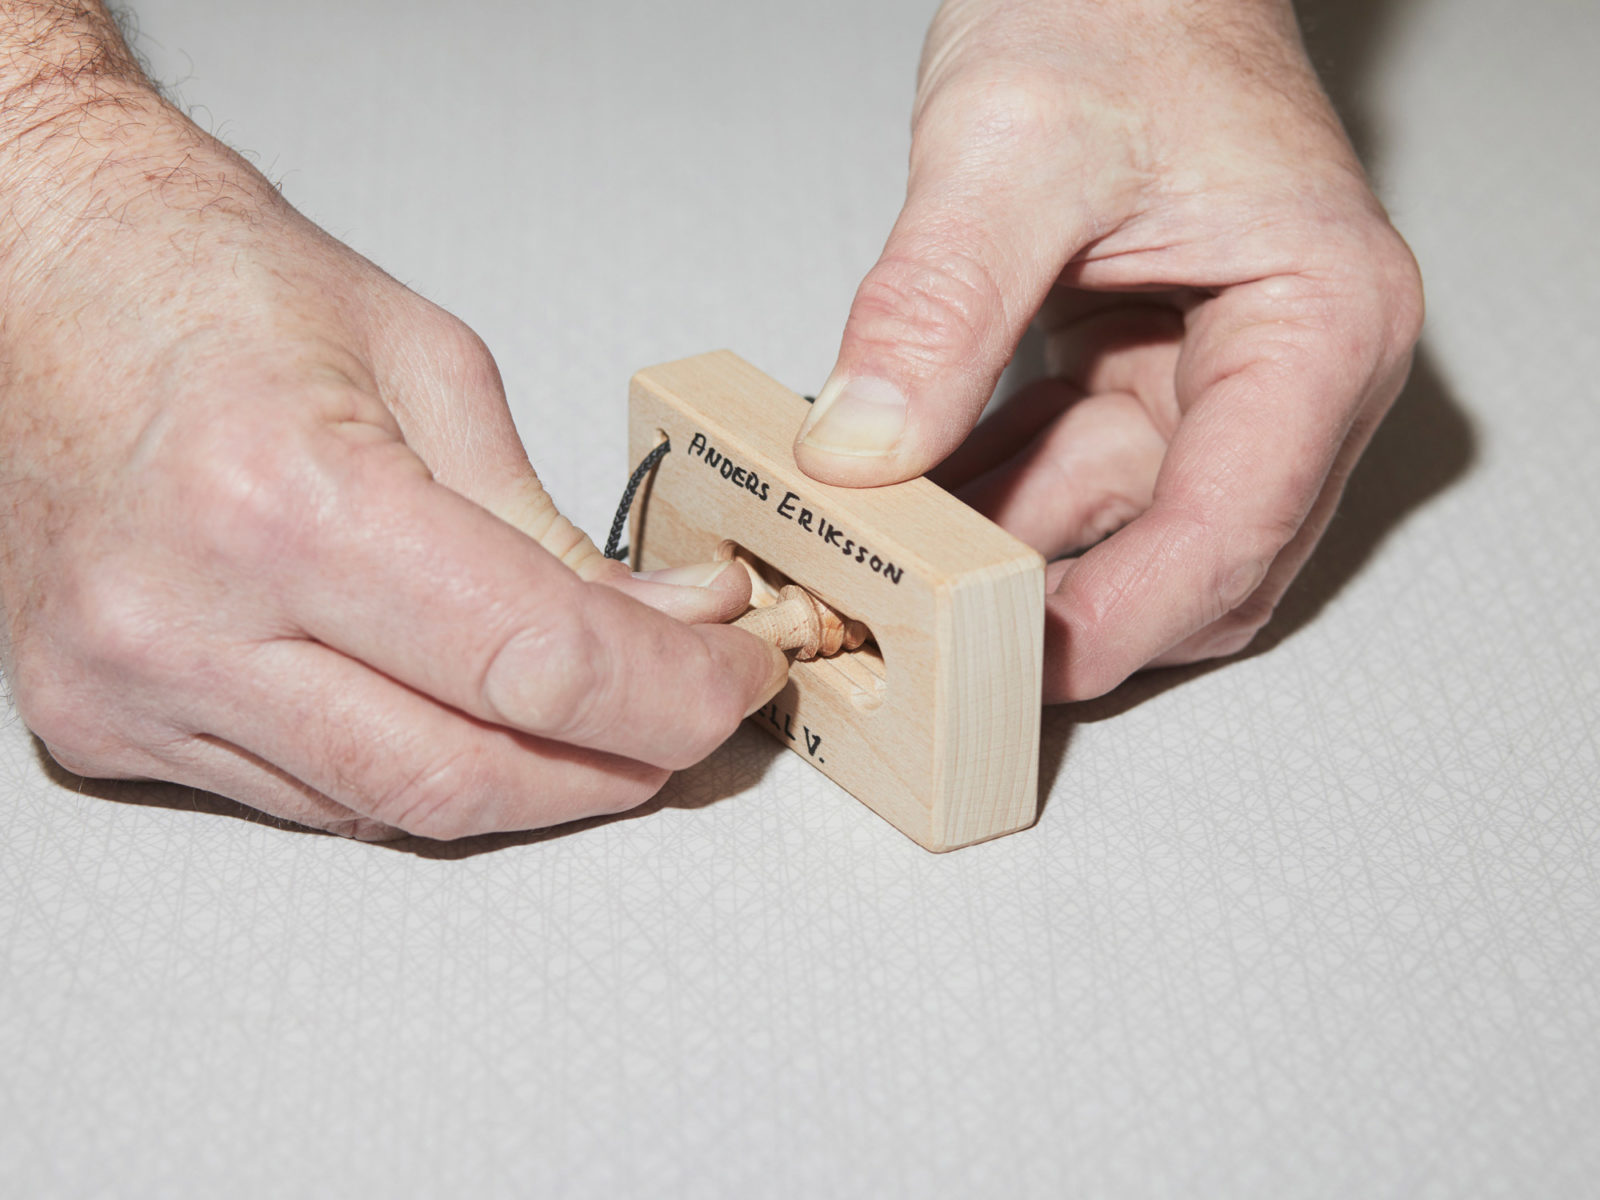 Hands holding a small wooden block with a hole, and a small wooden plug. Anders Eriksson is written on the block.